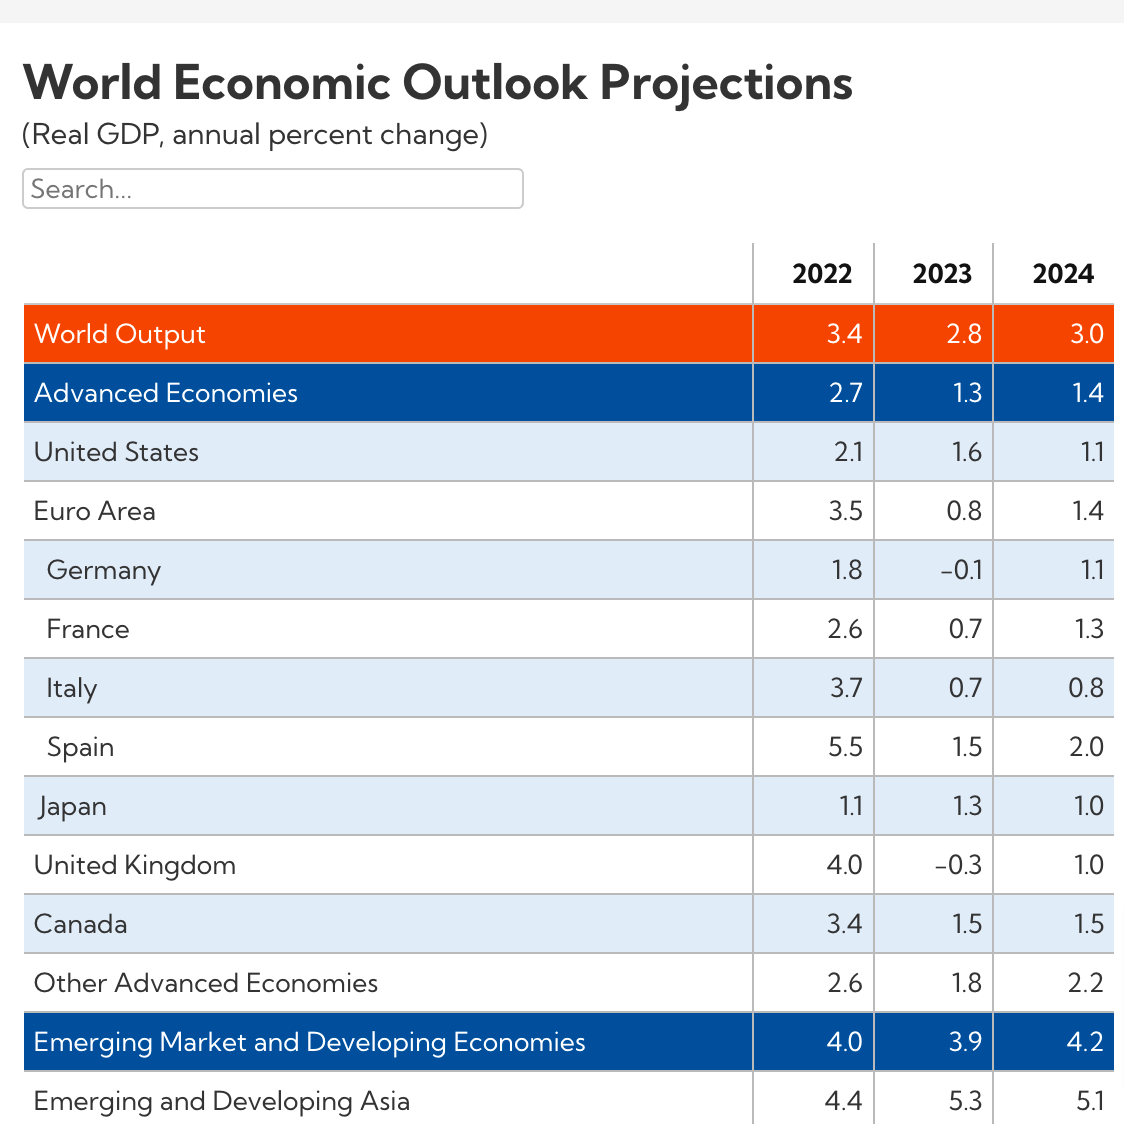 World Economic Outlook Projections by IMF 